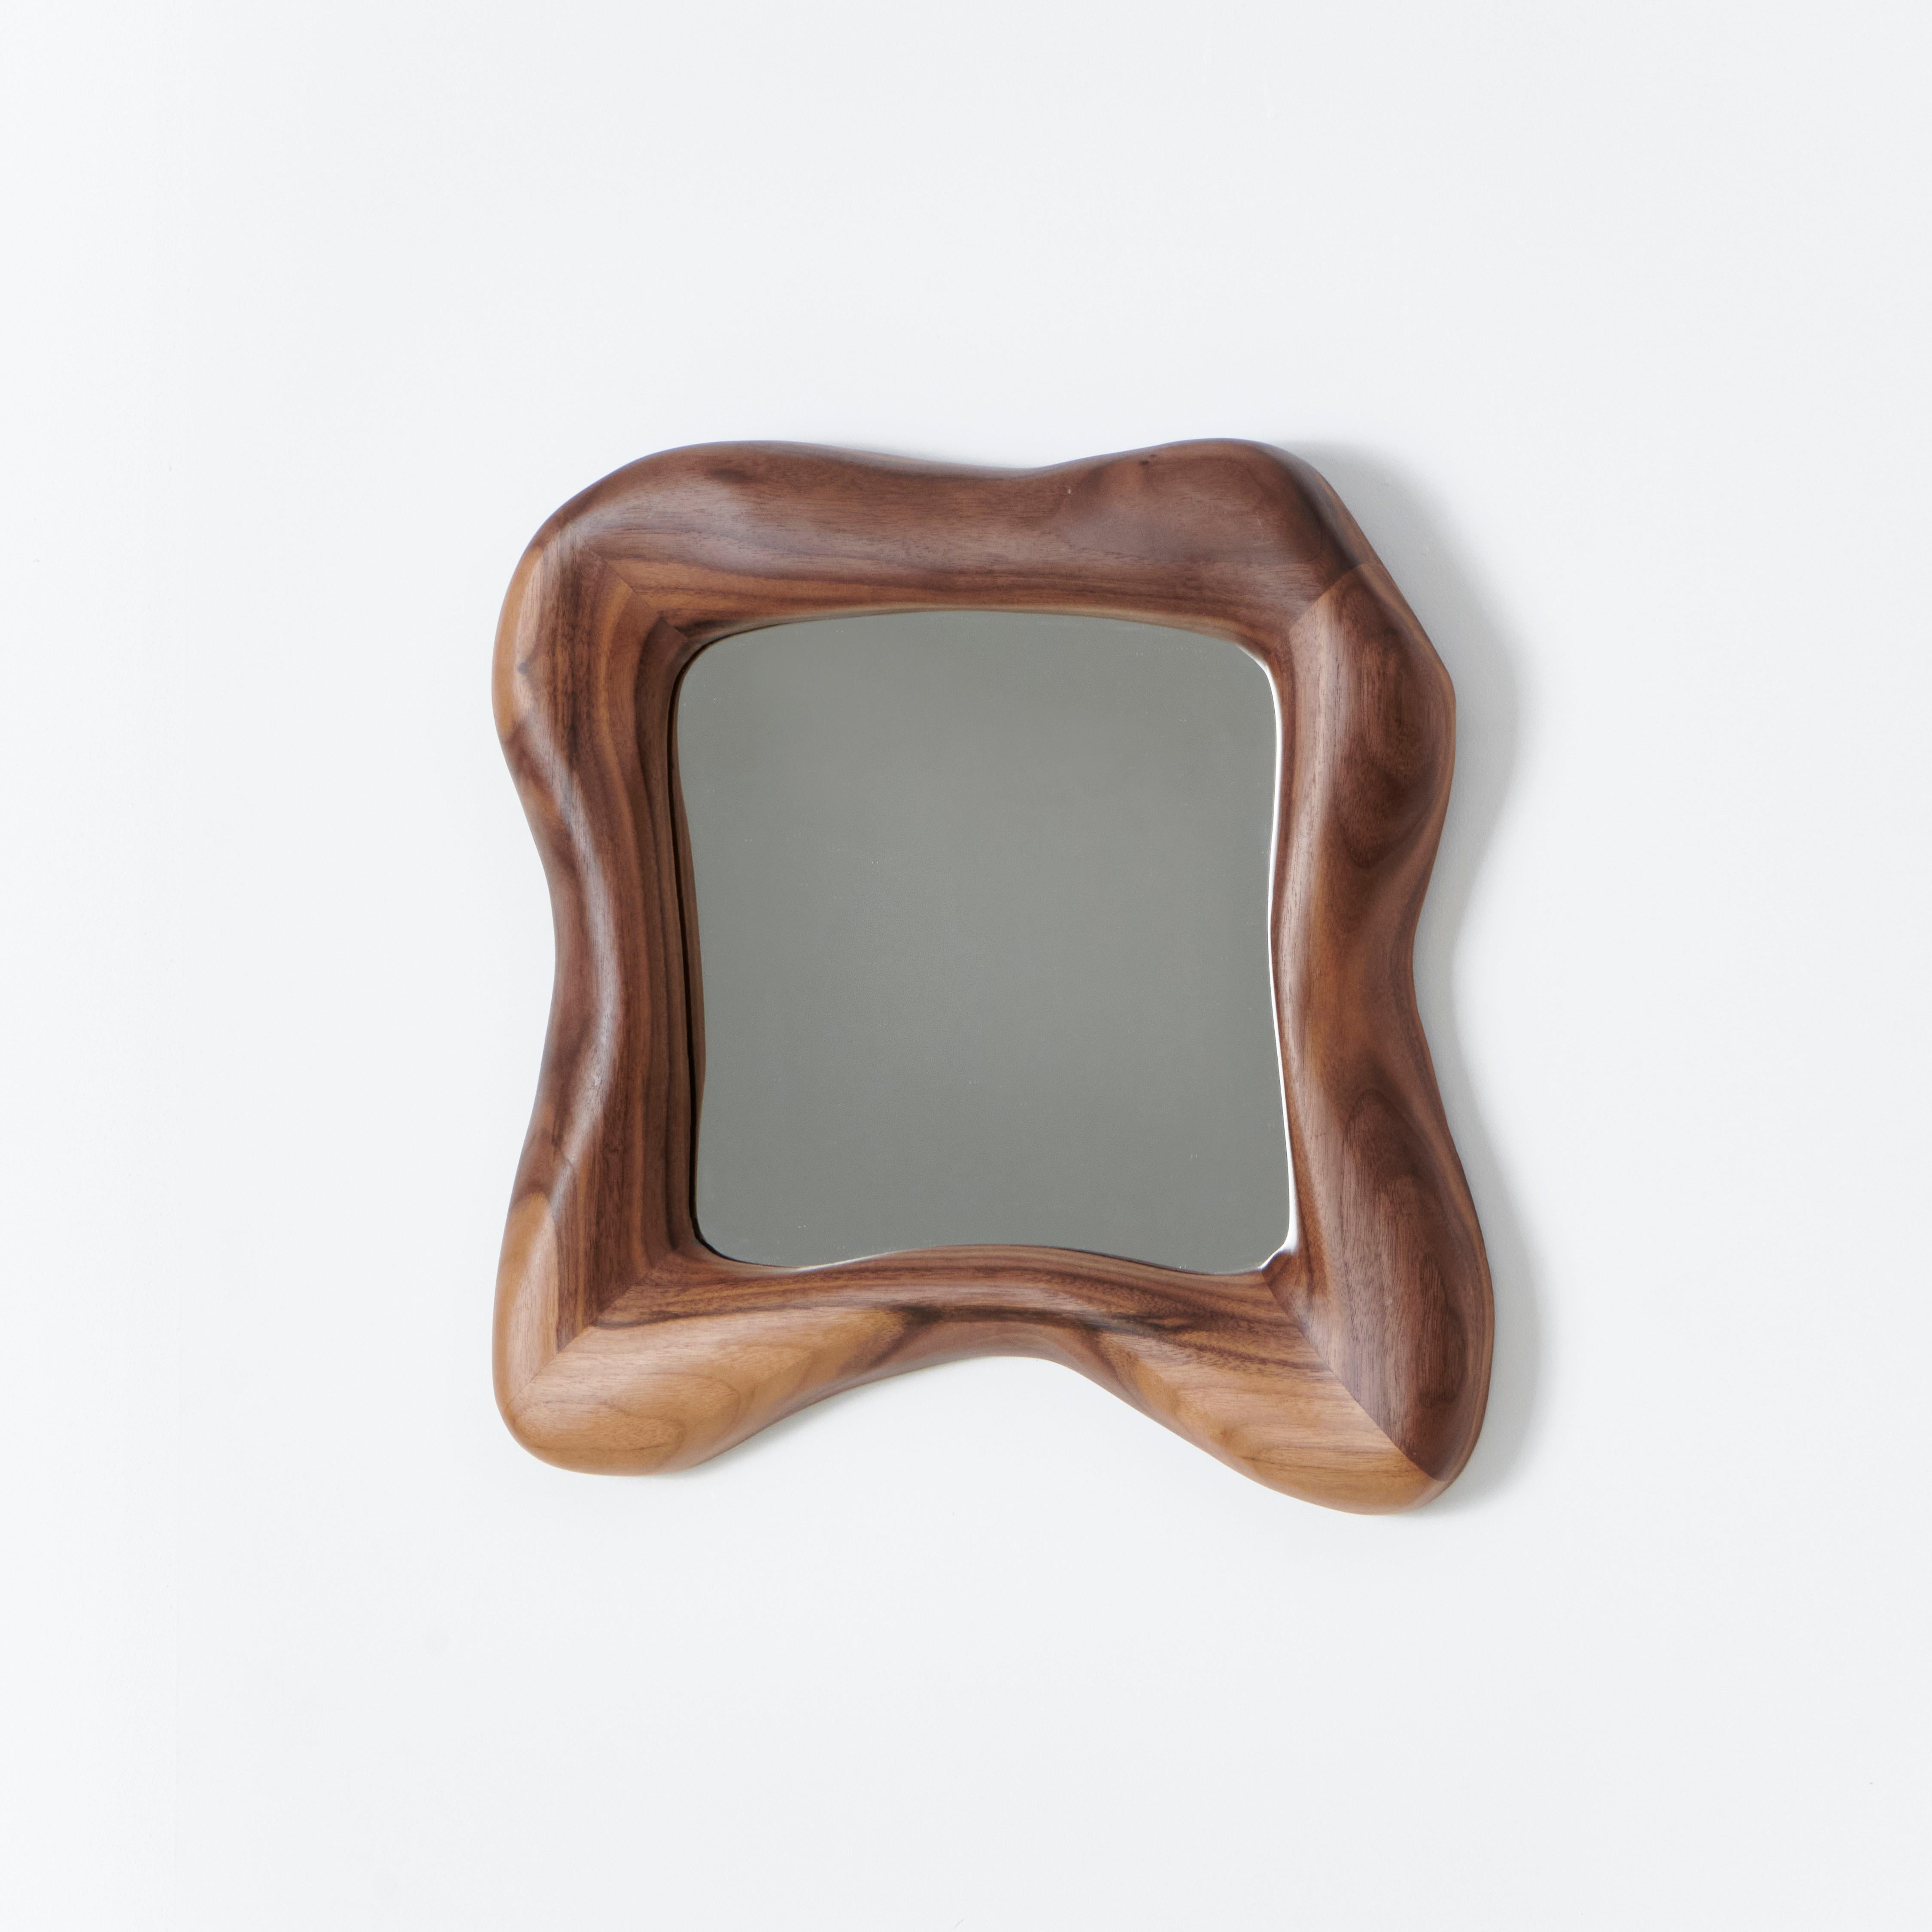 Minho Mirror
Designed by Project 213A in 2024

The Minho mirror is framed in solid wood with an abstract organic shape.
Crafted by Skilled artisans in Northern Portugal.
Bespoke dimensions available upon request

Please note wood is a natural